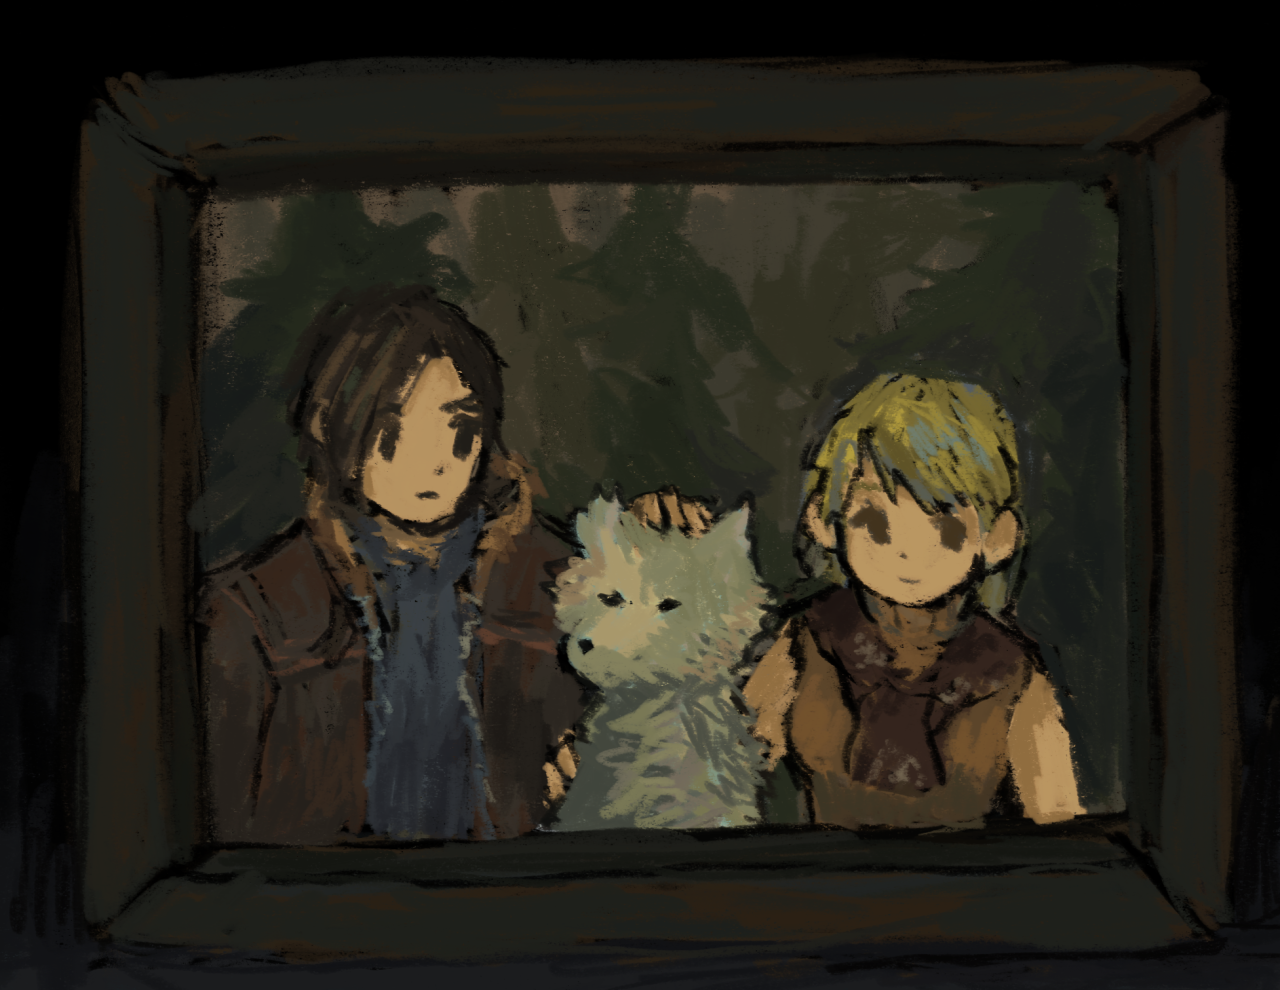 the blue sun — A family photo of Leon, Ashley, and the wolf Leon